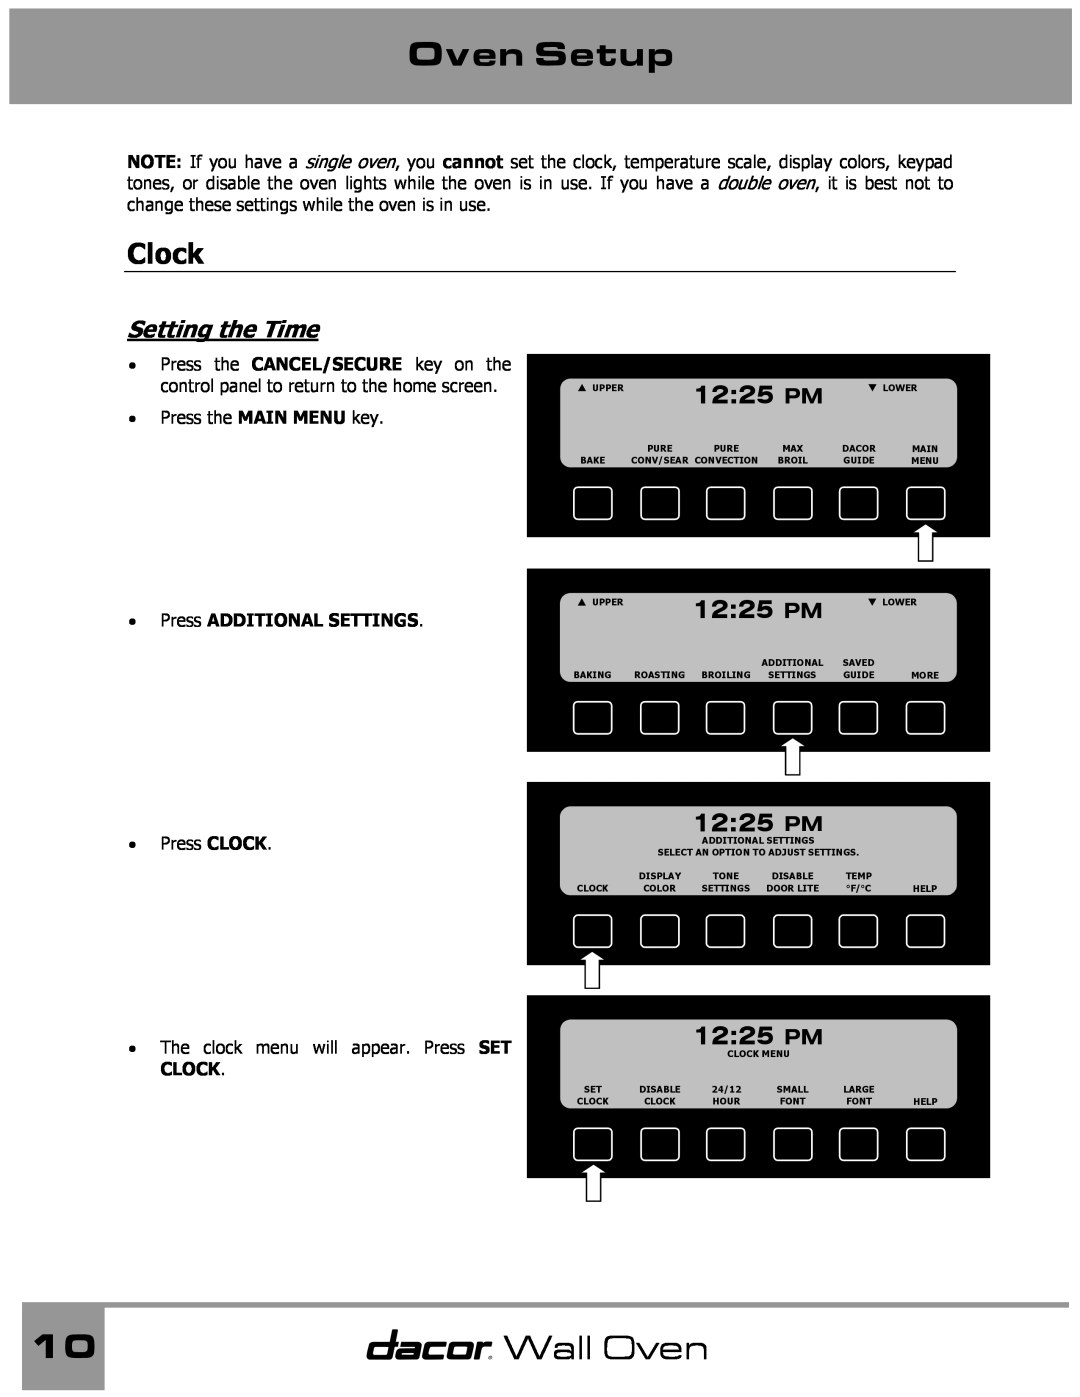 Dacor Wall Oven manual Oven Setup, Clock, 1225 PM, Setting the Time, Press ADDITIONAL SETTINGS, Press CLOCK 